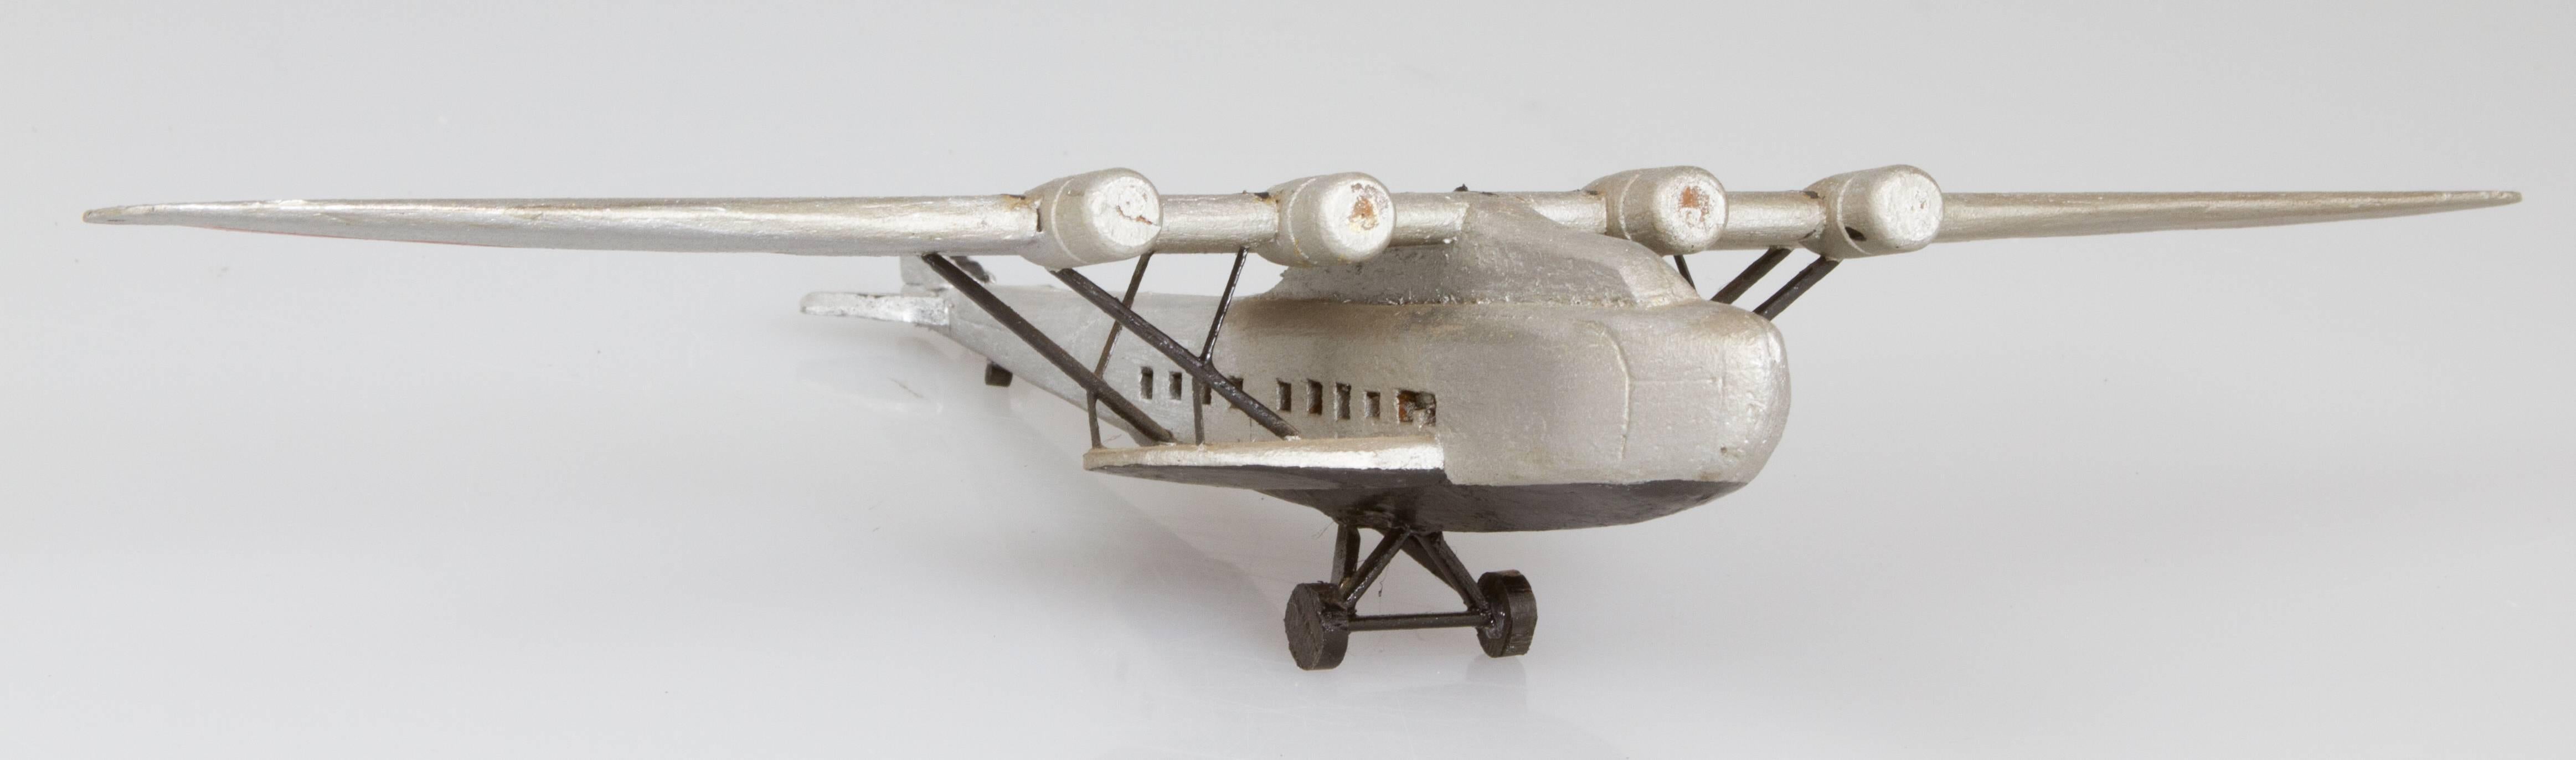 This is a charming hand-carved and constructed airplane. It is made out of balsa wood and hand-painted.